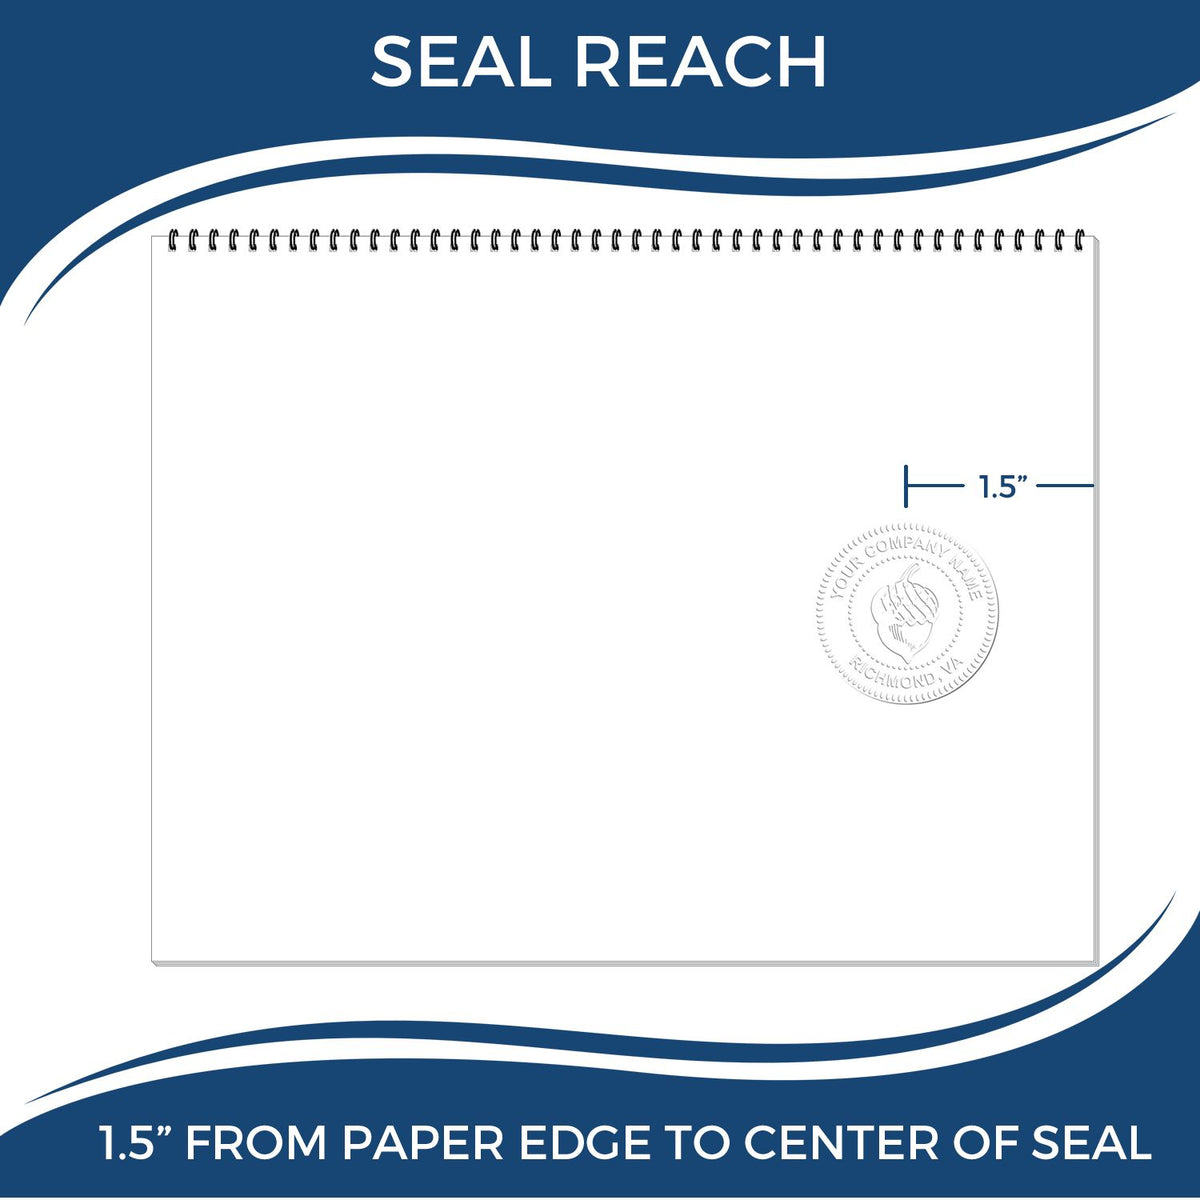 An infographic showing the seal reach which is represented by a ruler and a miniature seal image of the State of Arizona Architectural Seal Embosser